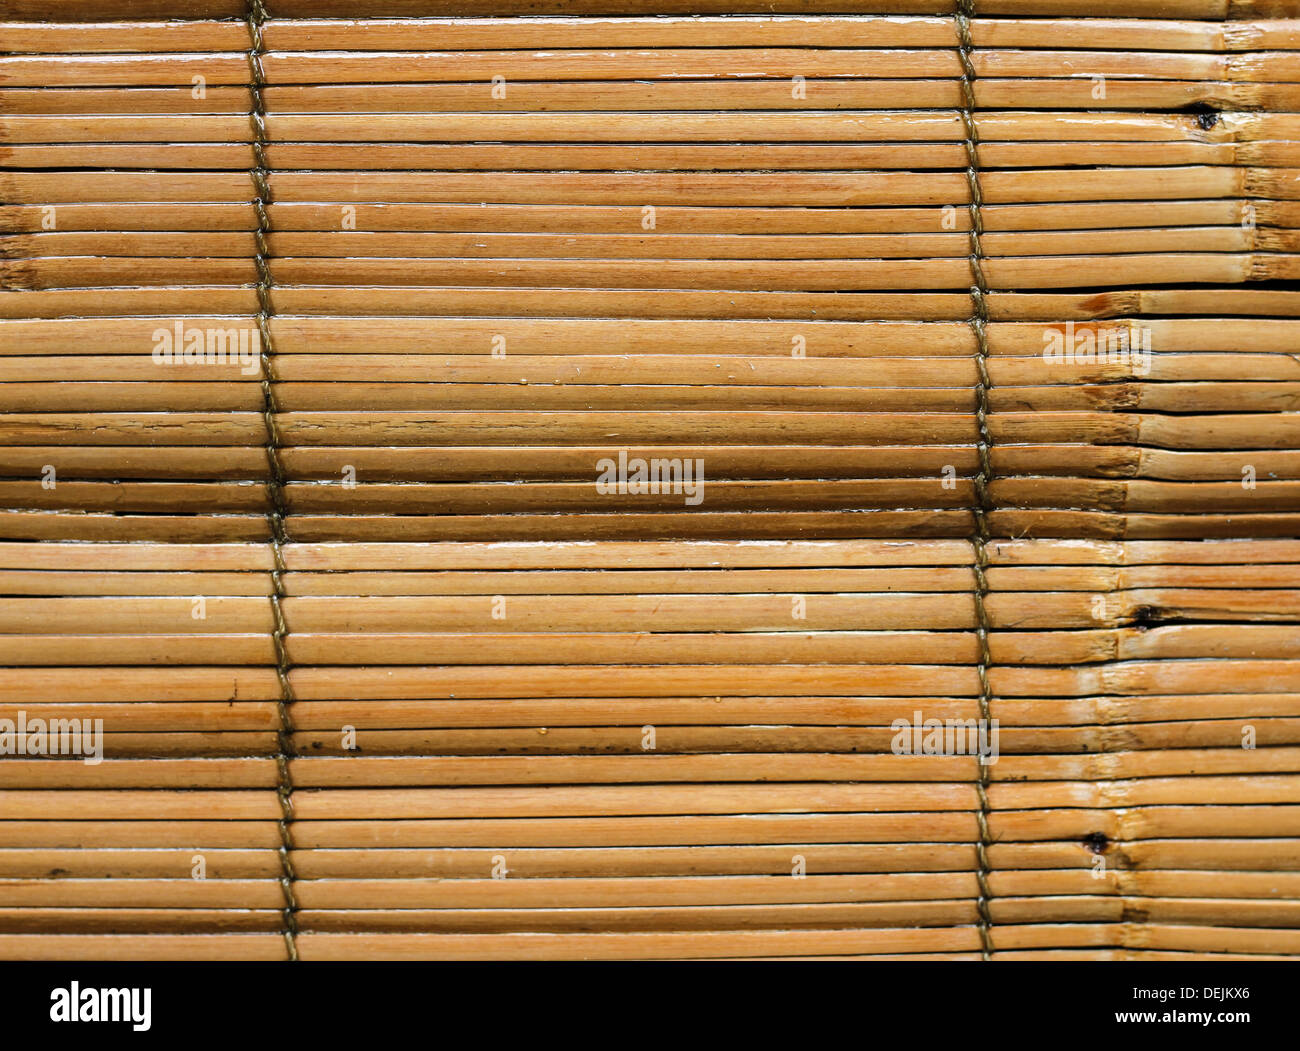 A piece of varnished bamboo, background Stock Photo